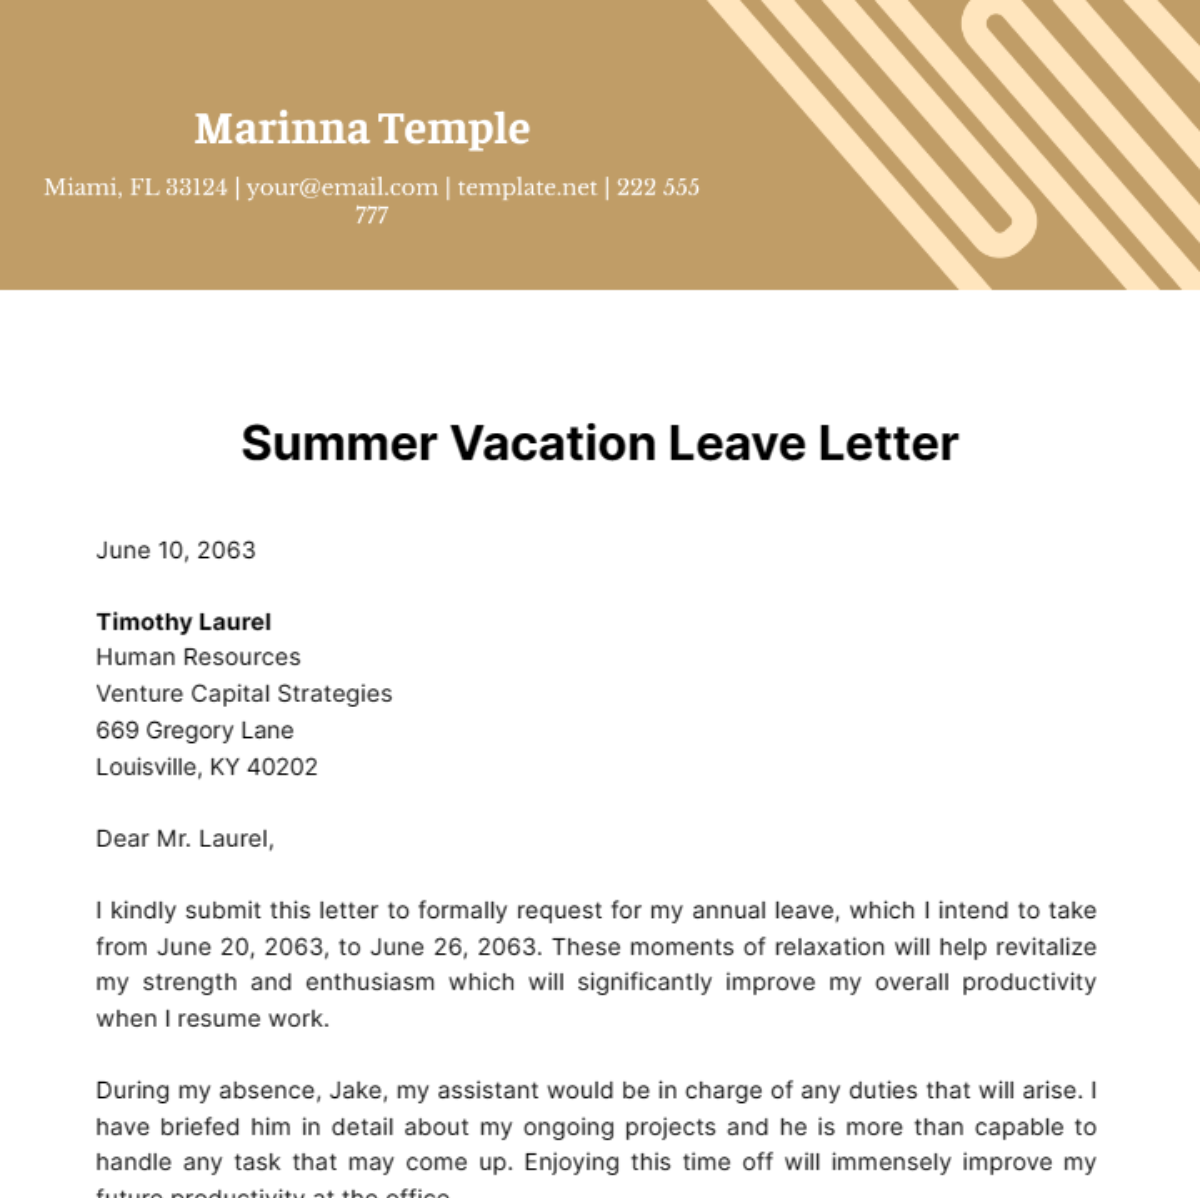 Summer Vacation Leave Letter Template